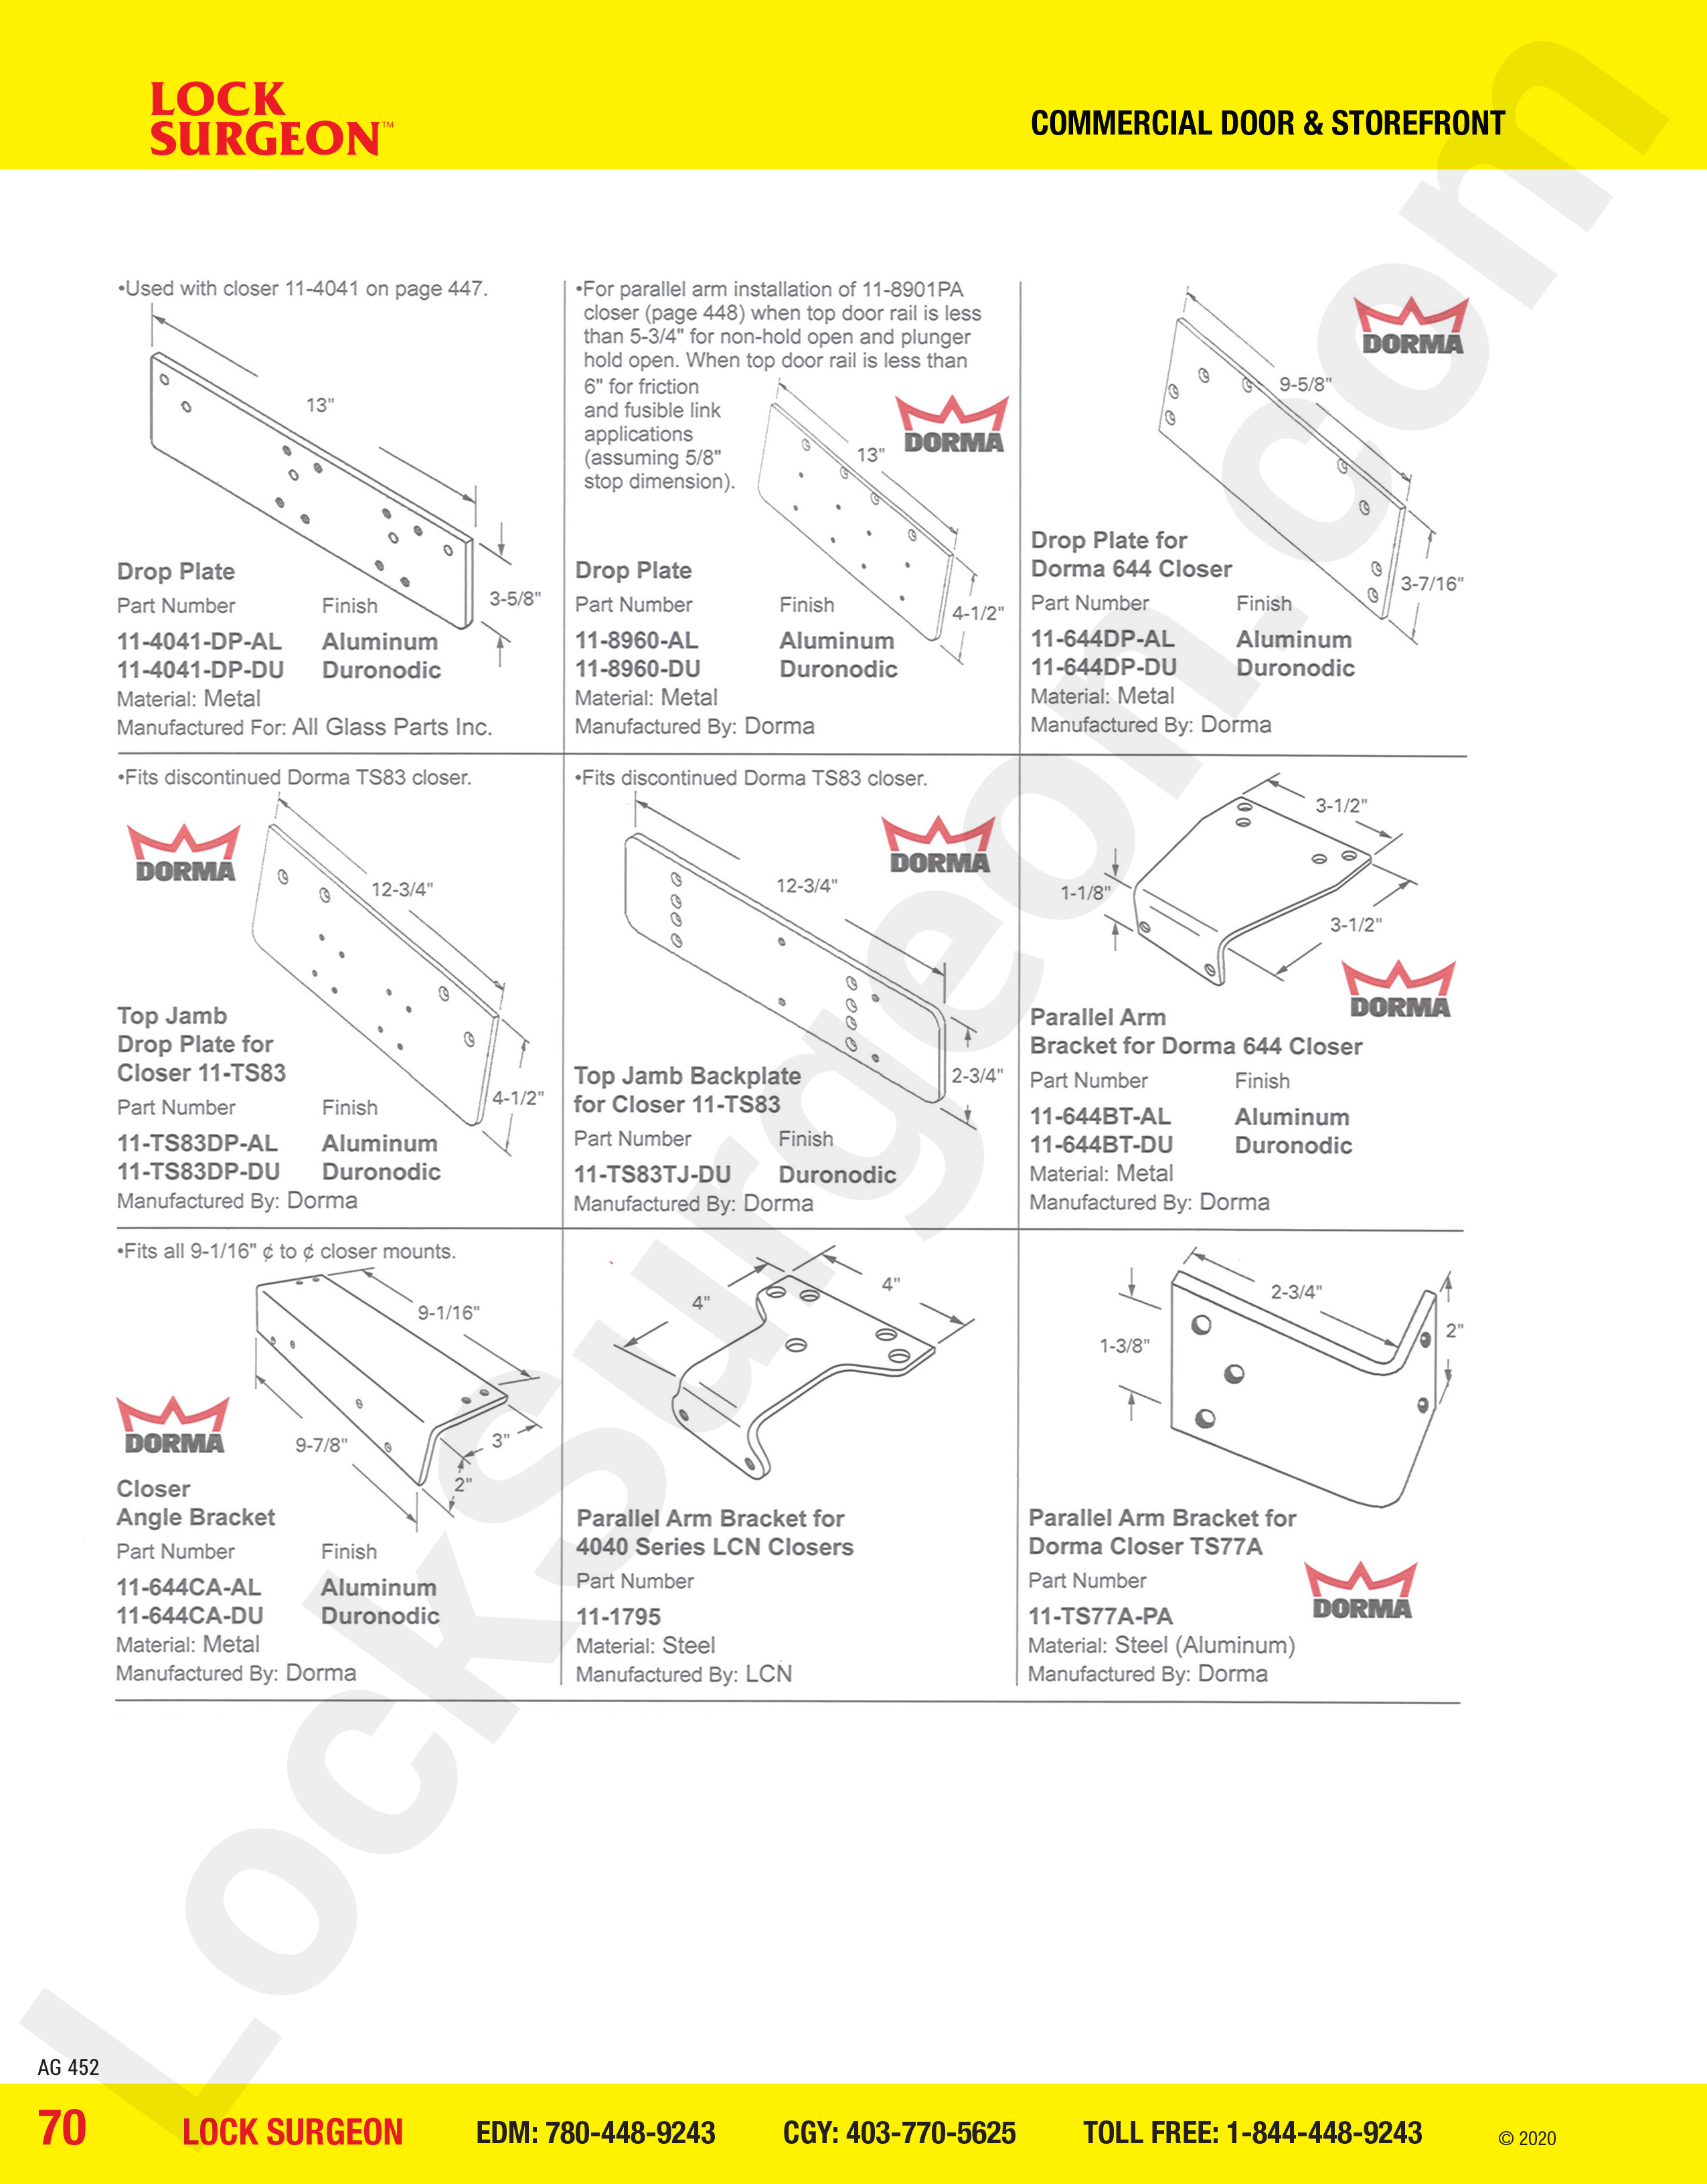 Commercial Door and Storefront parts for drop plates Acheson